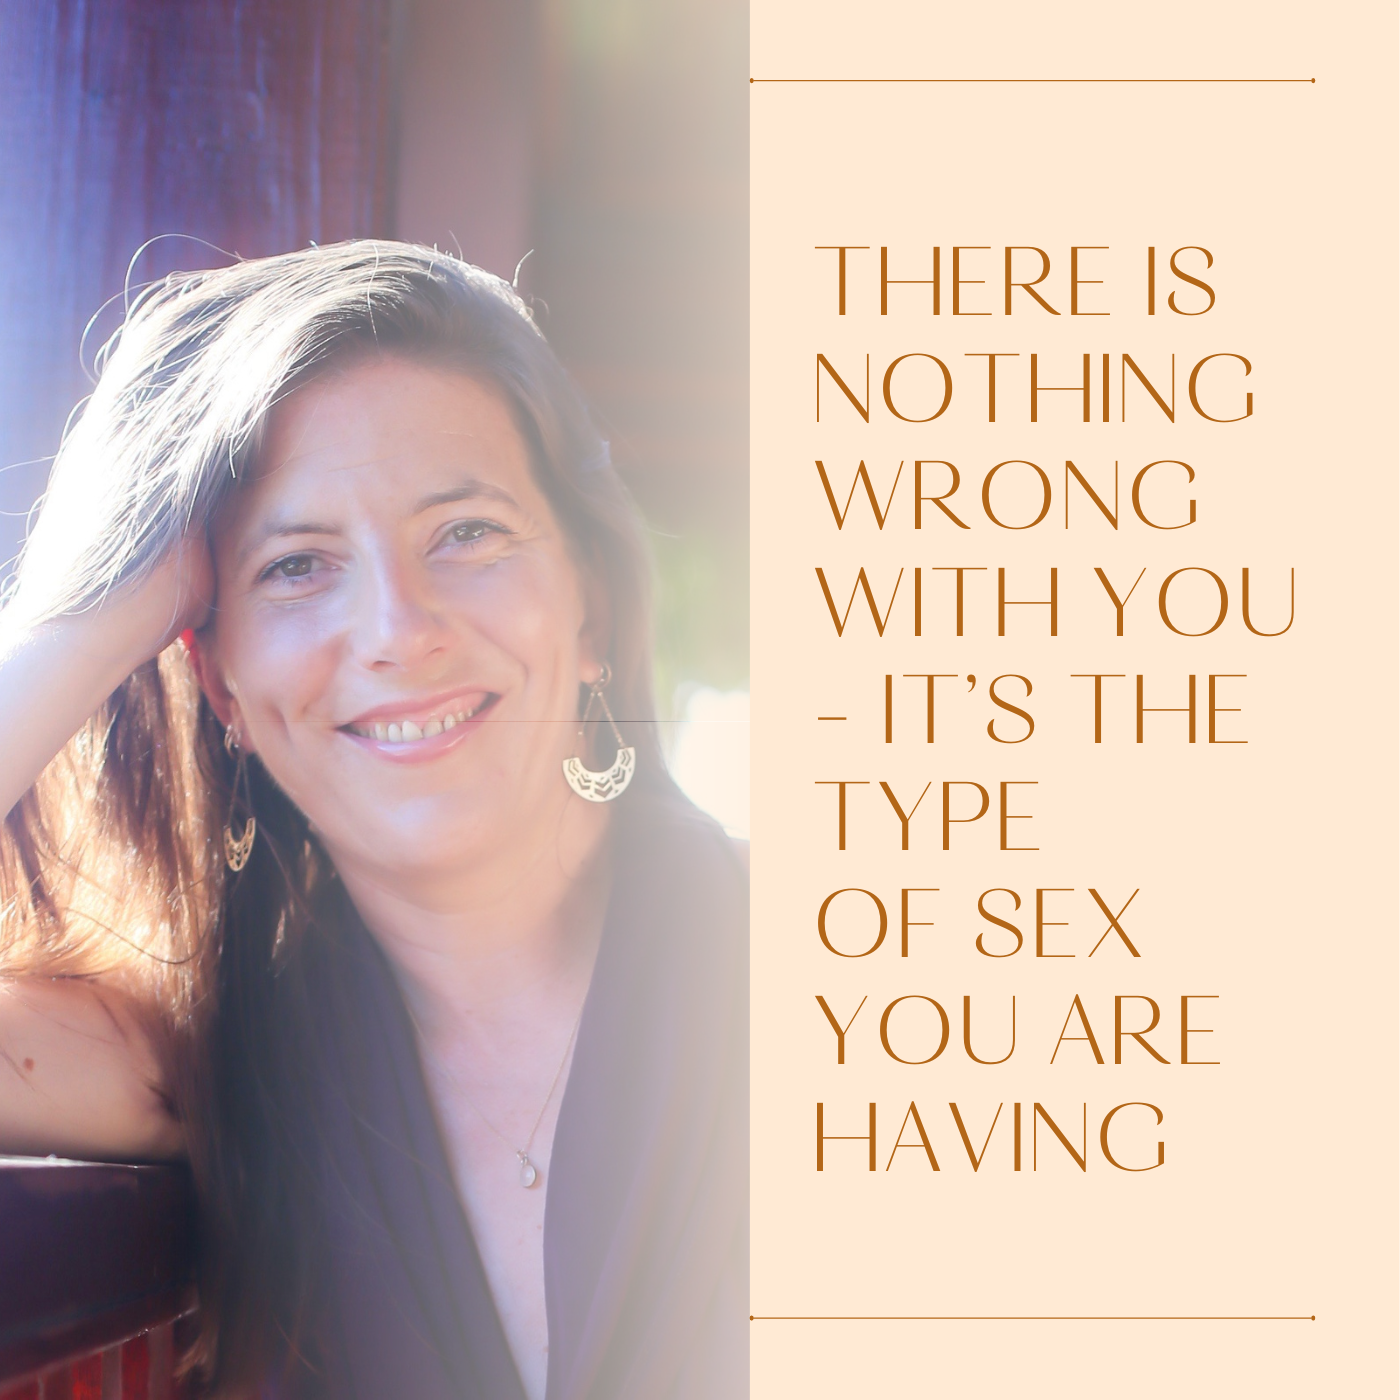 There is nothing ‘wrong’ with you – it’s the type of sex you’re having!